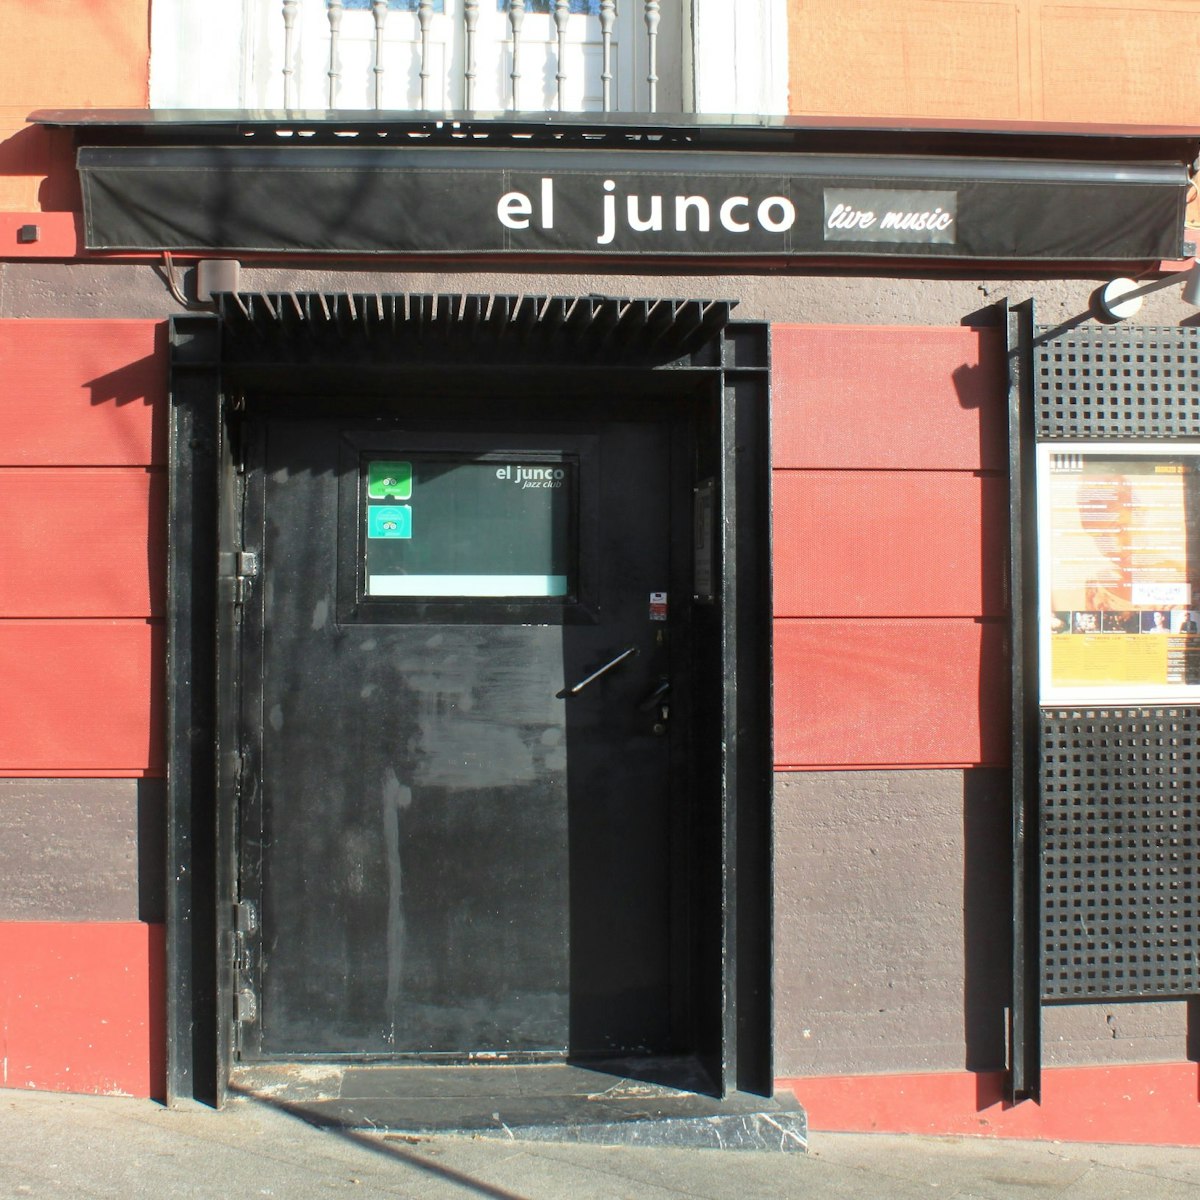 El Junco, in the late afternoon before opening hours begin.